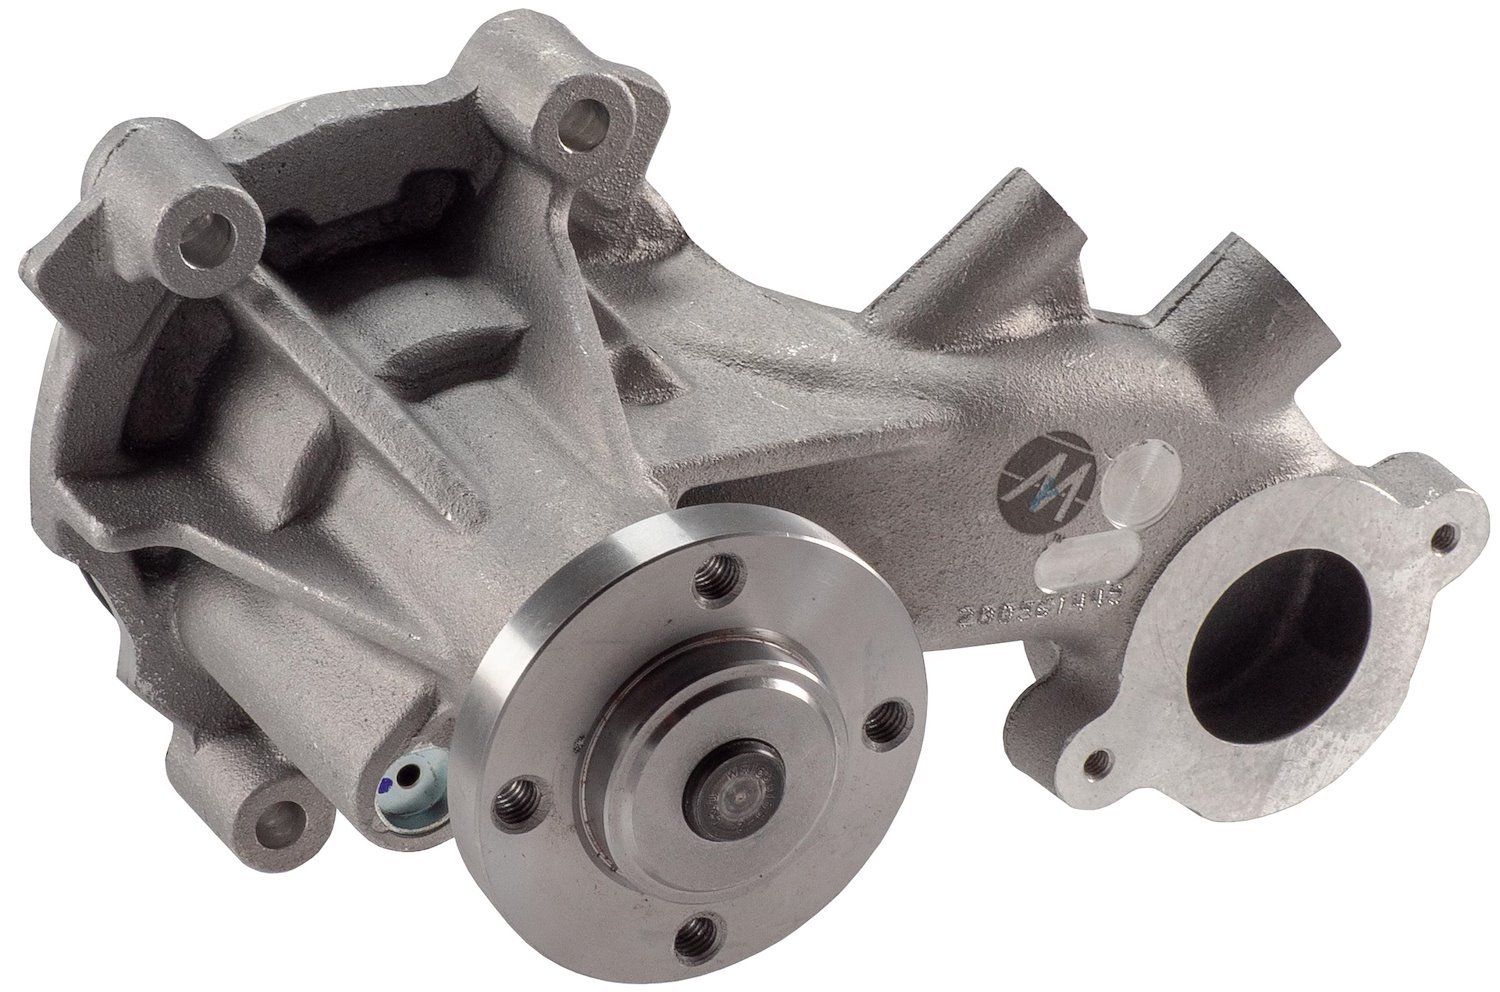 Water Pump Fits Select 2011-2014 Ford F-150, Mustang 5.0L Engines